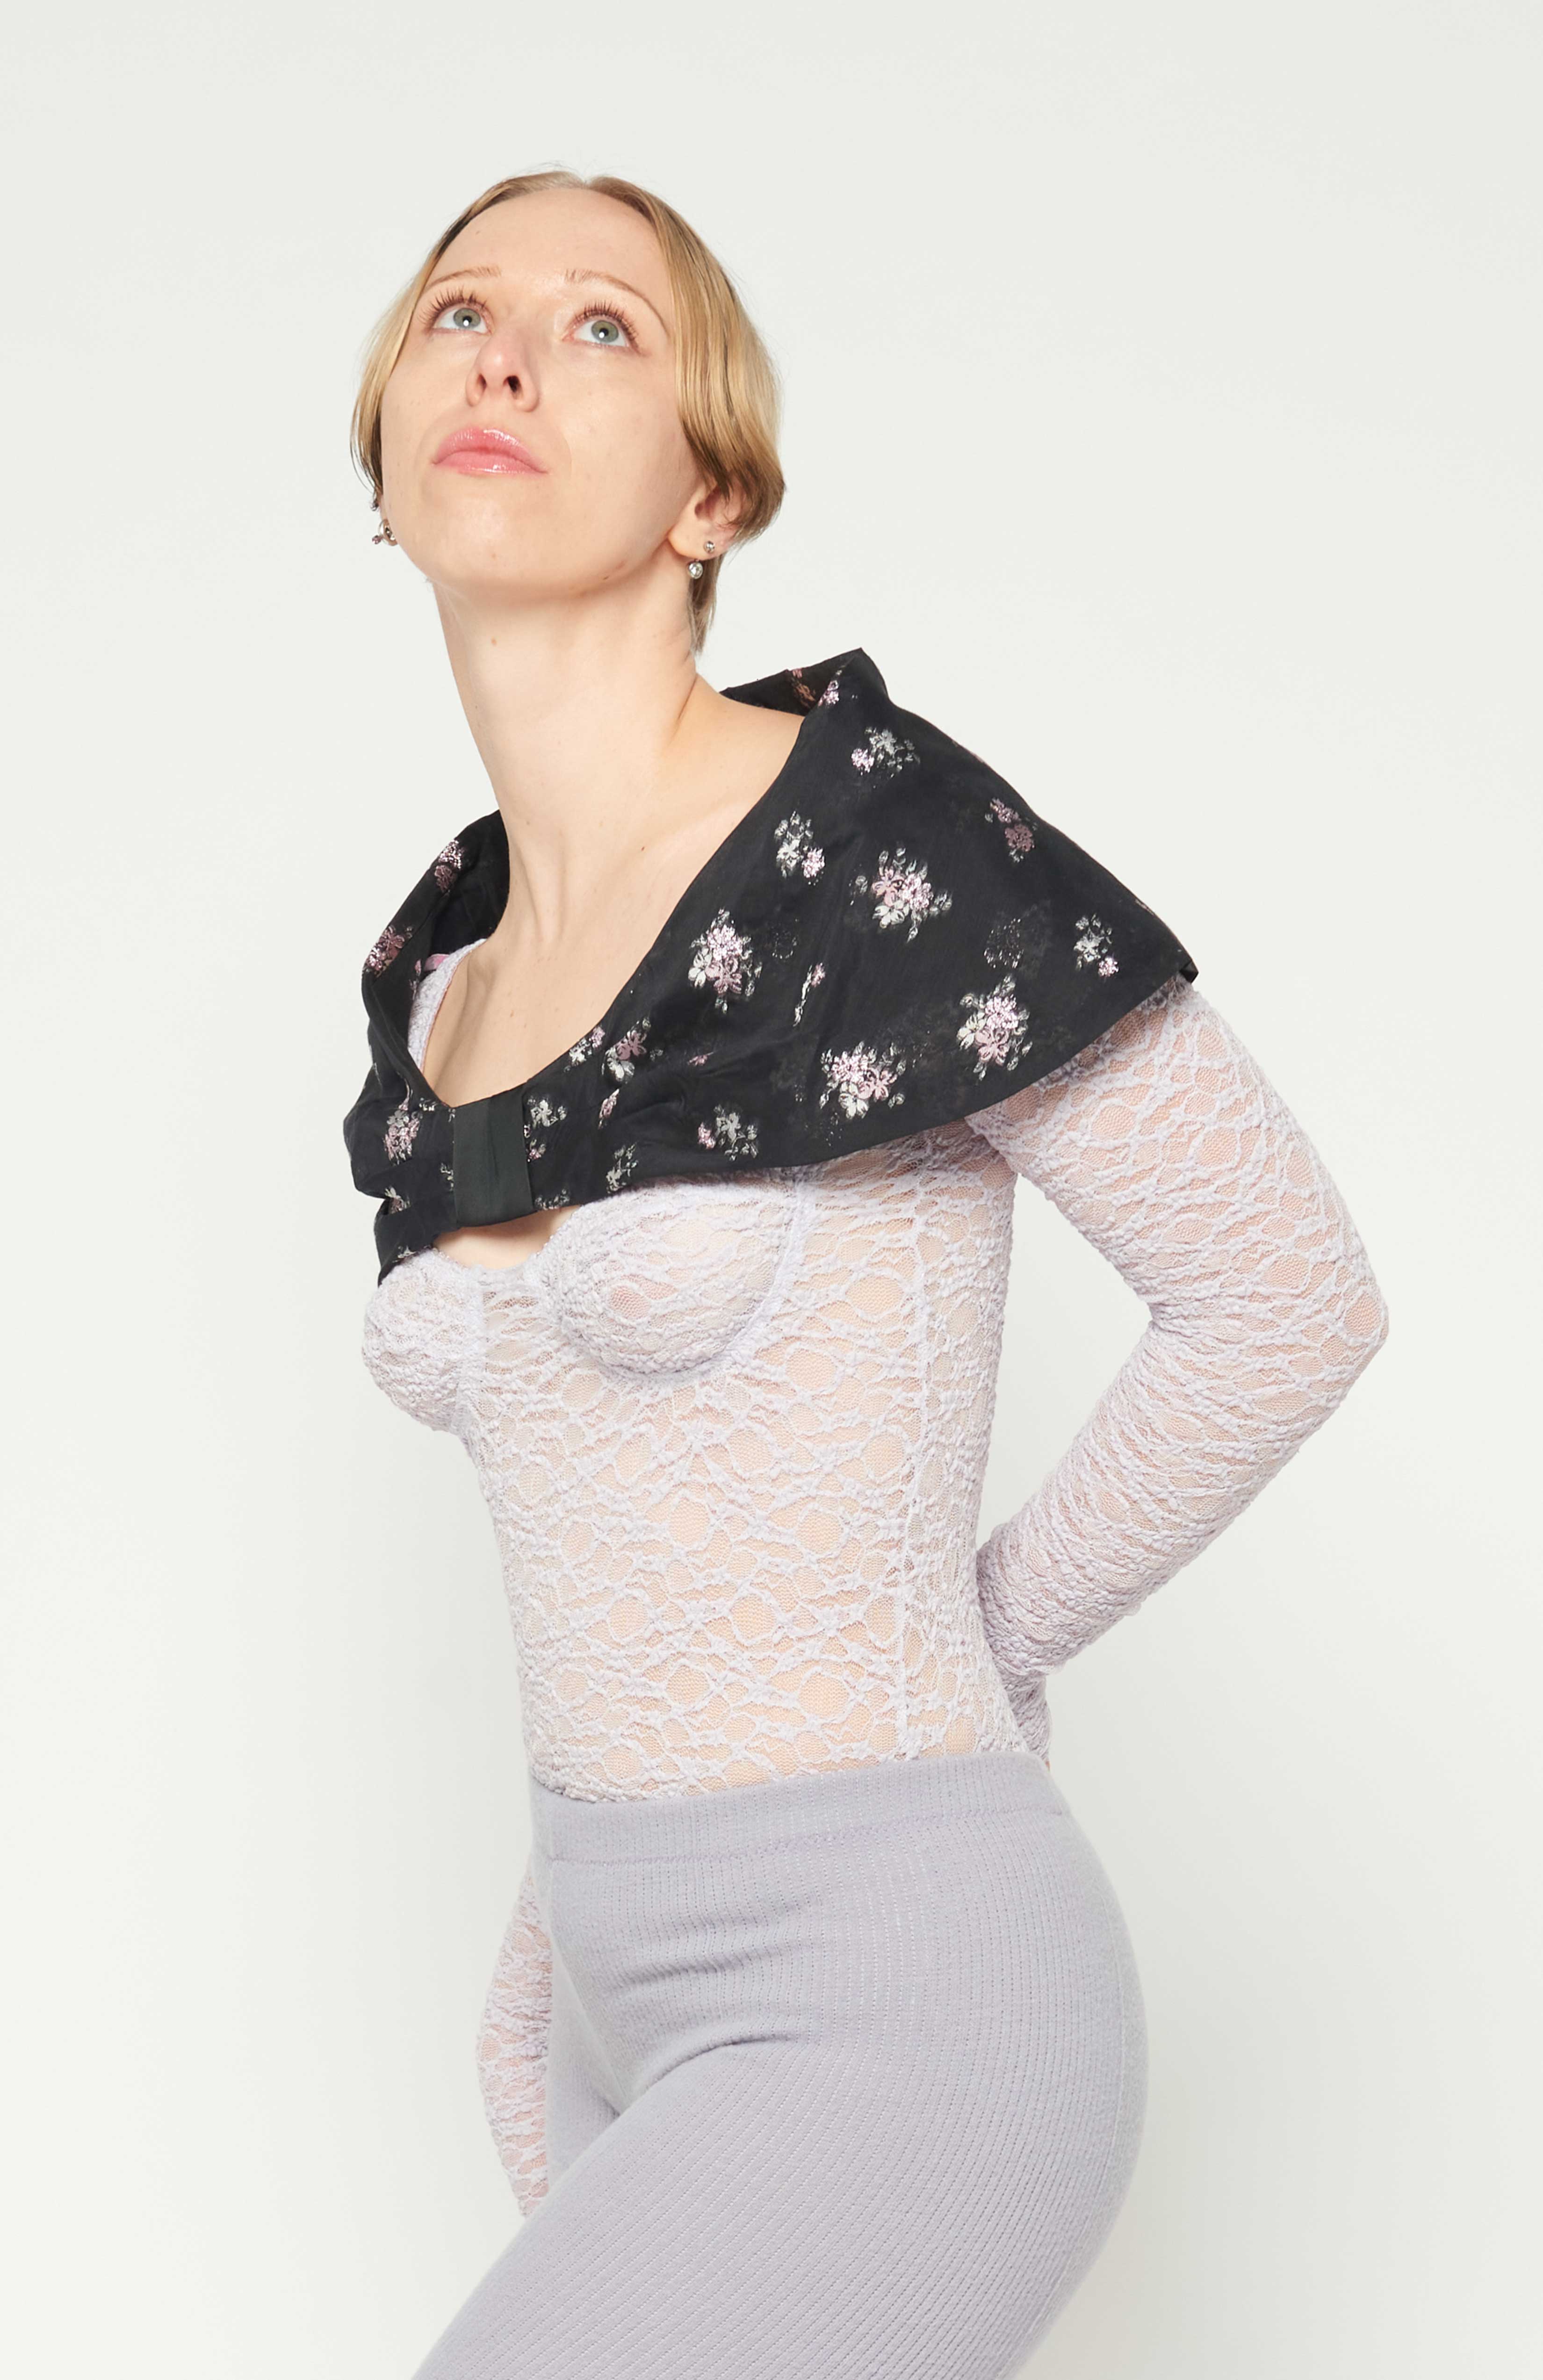 Maroske Peech, A stylish cape-like black floral bow collar. Sits on your shoulders to frame the neck and face. Fashioned in a light weight woven jacquard with a flattering detailed pink metallic floral. A perfect way to create a dramatic frame-like allure to elevate any outfit when your presence is required.